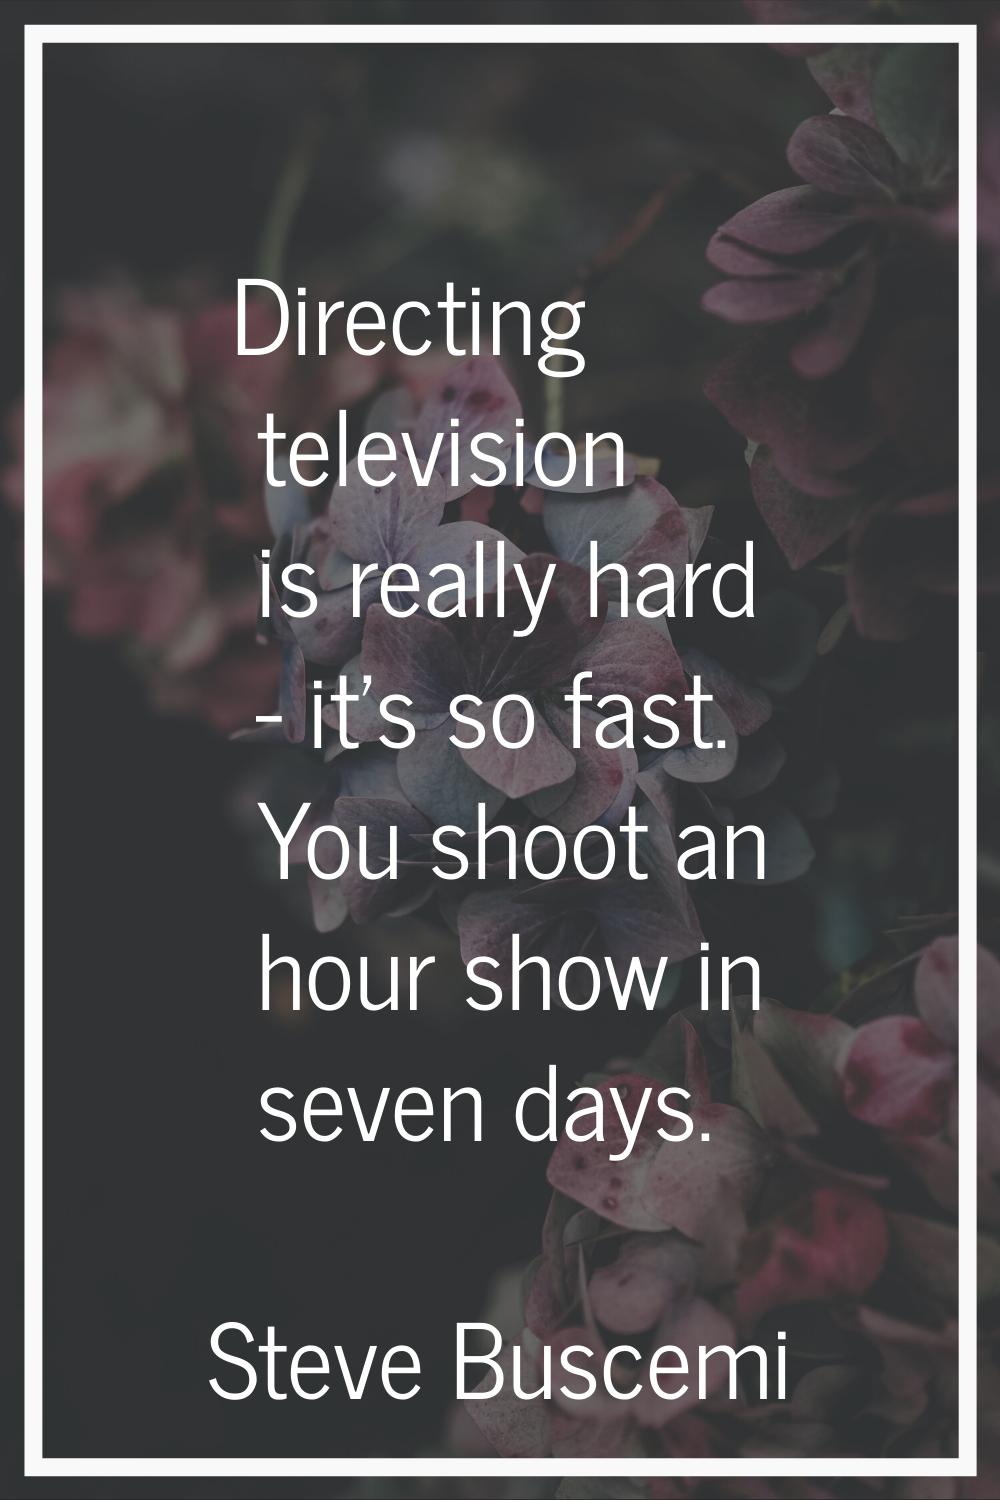 Directing television is really hard - it's so fast. You shoot an hour show in seven days.